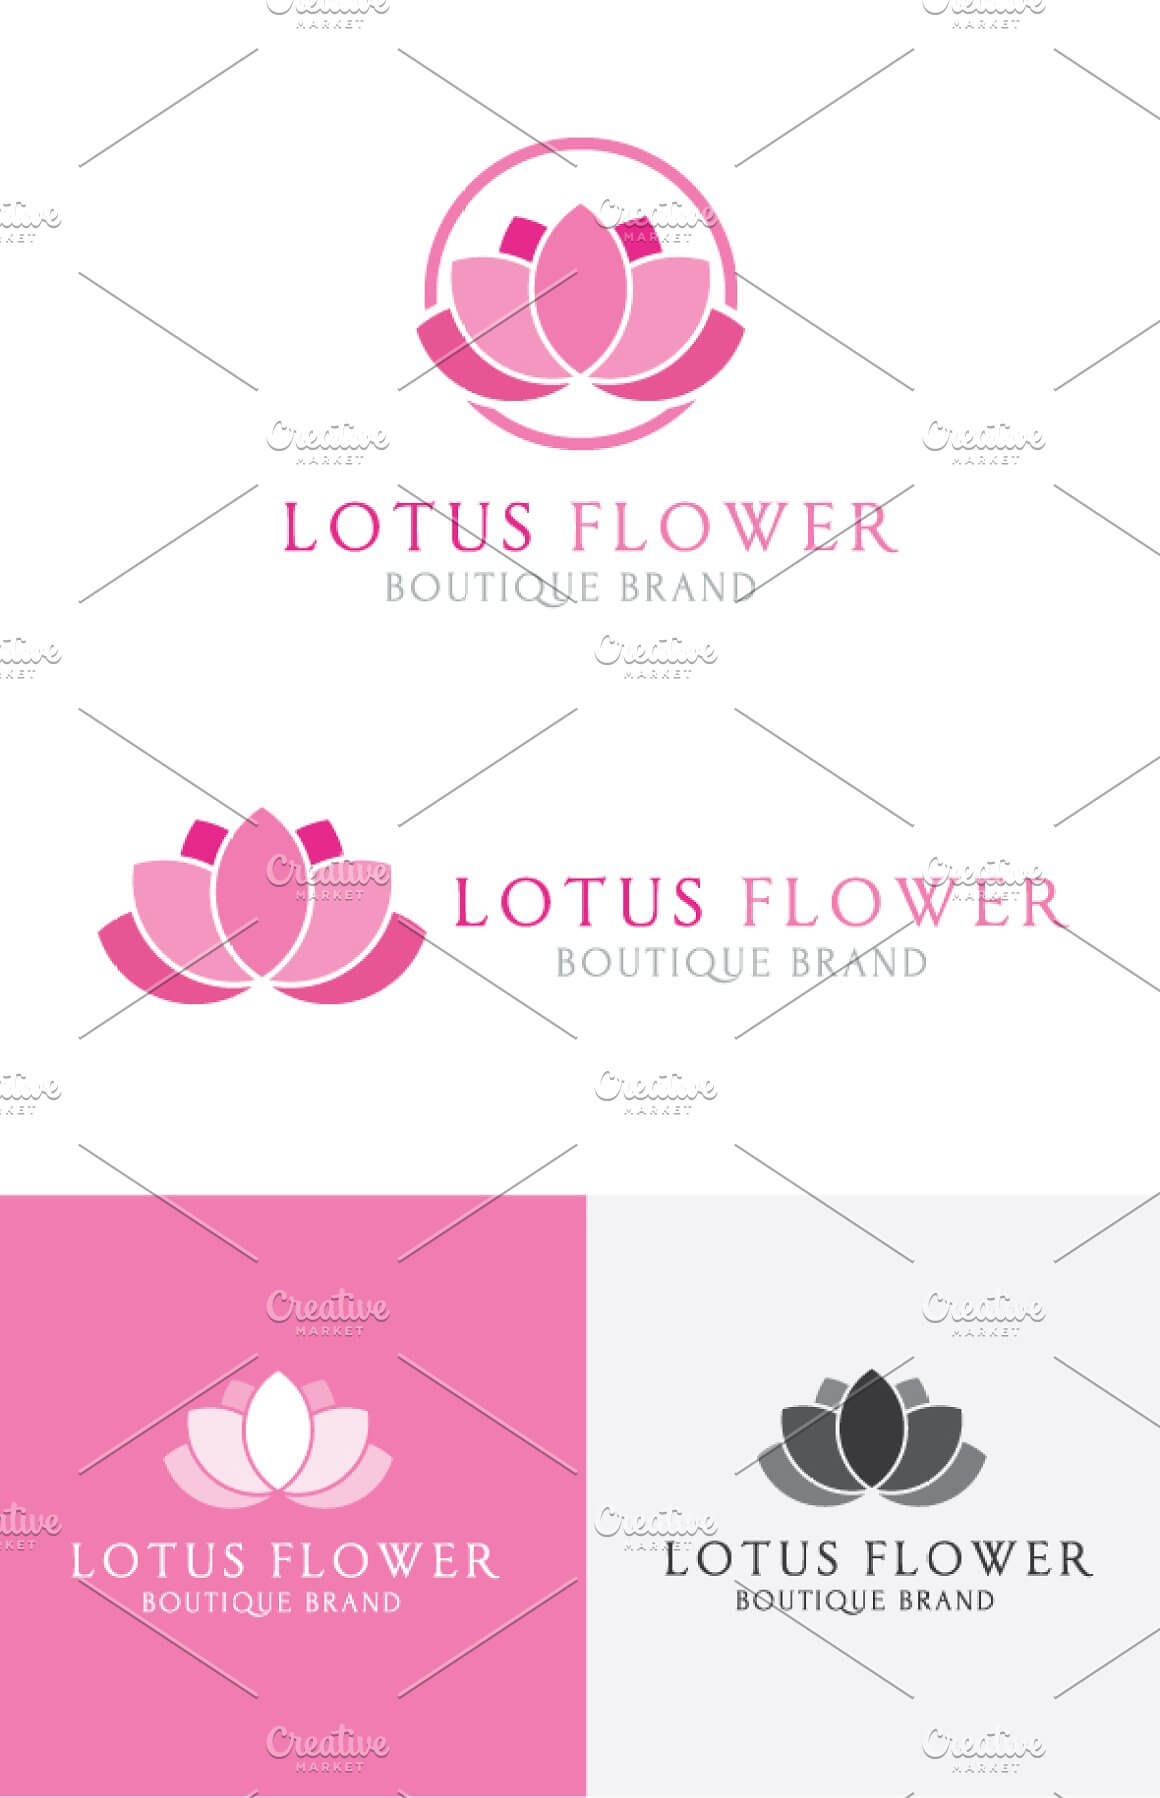 Pink lotus flower logos on white, pink and gray backgrounds.